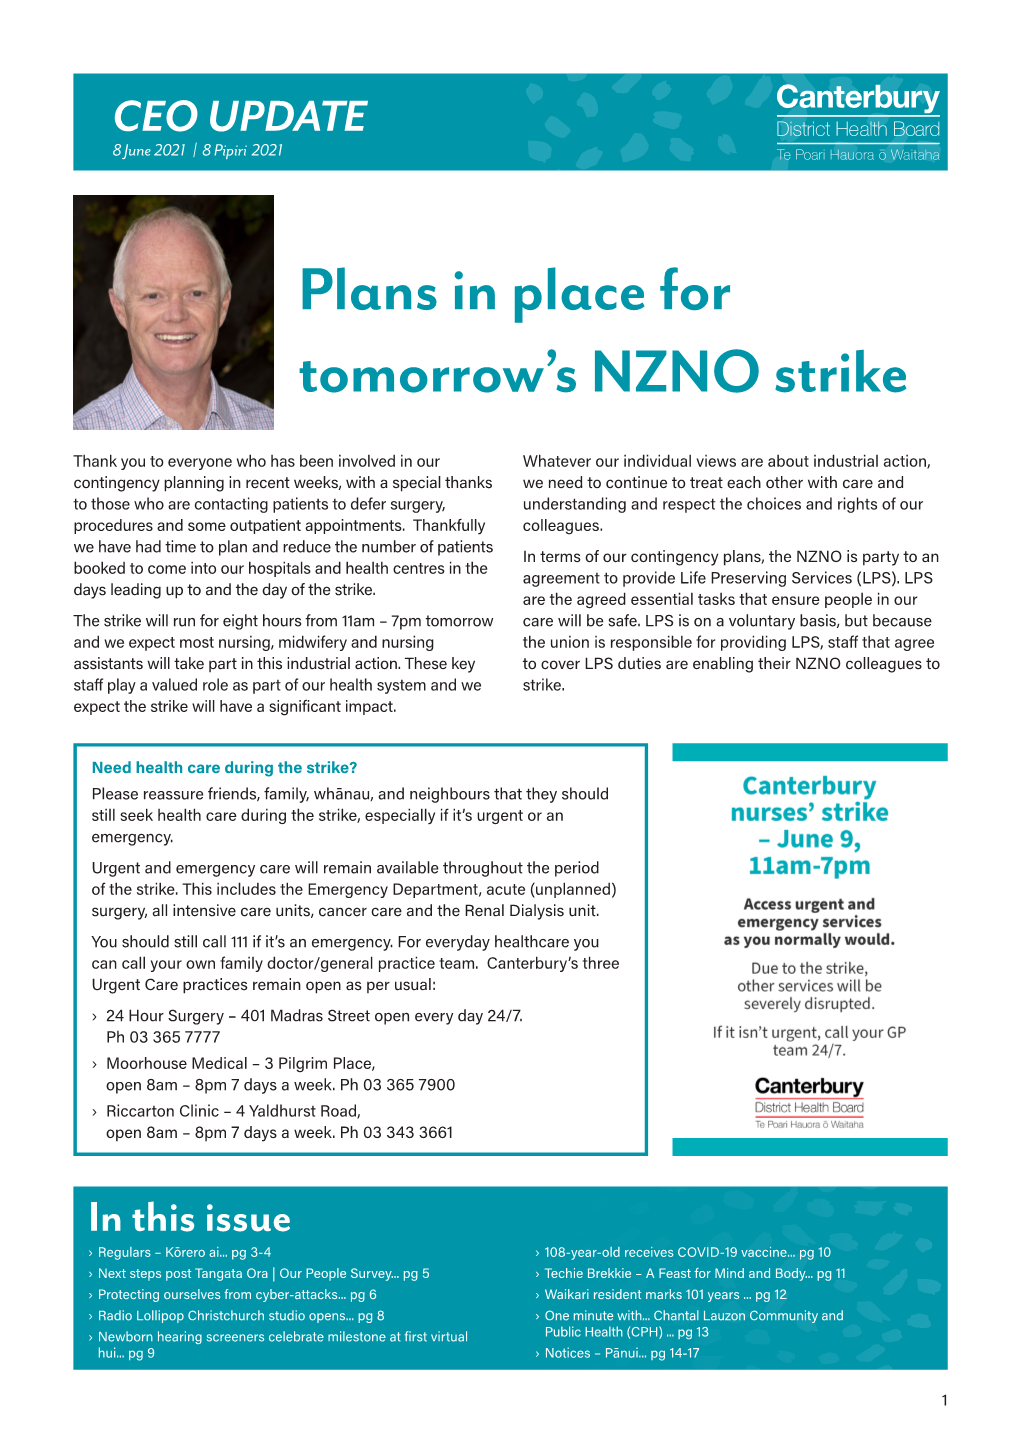 Plans in Place for Tomorrow's NZNO Strike